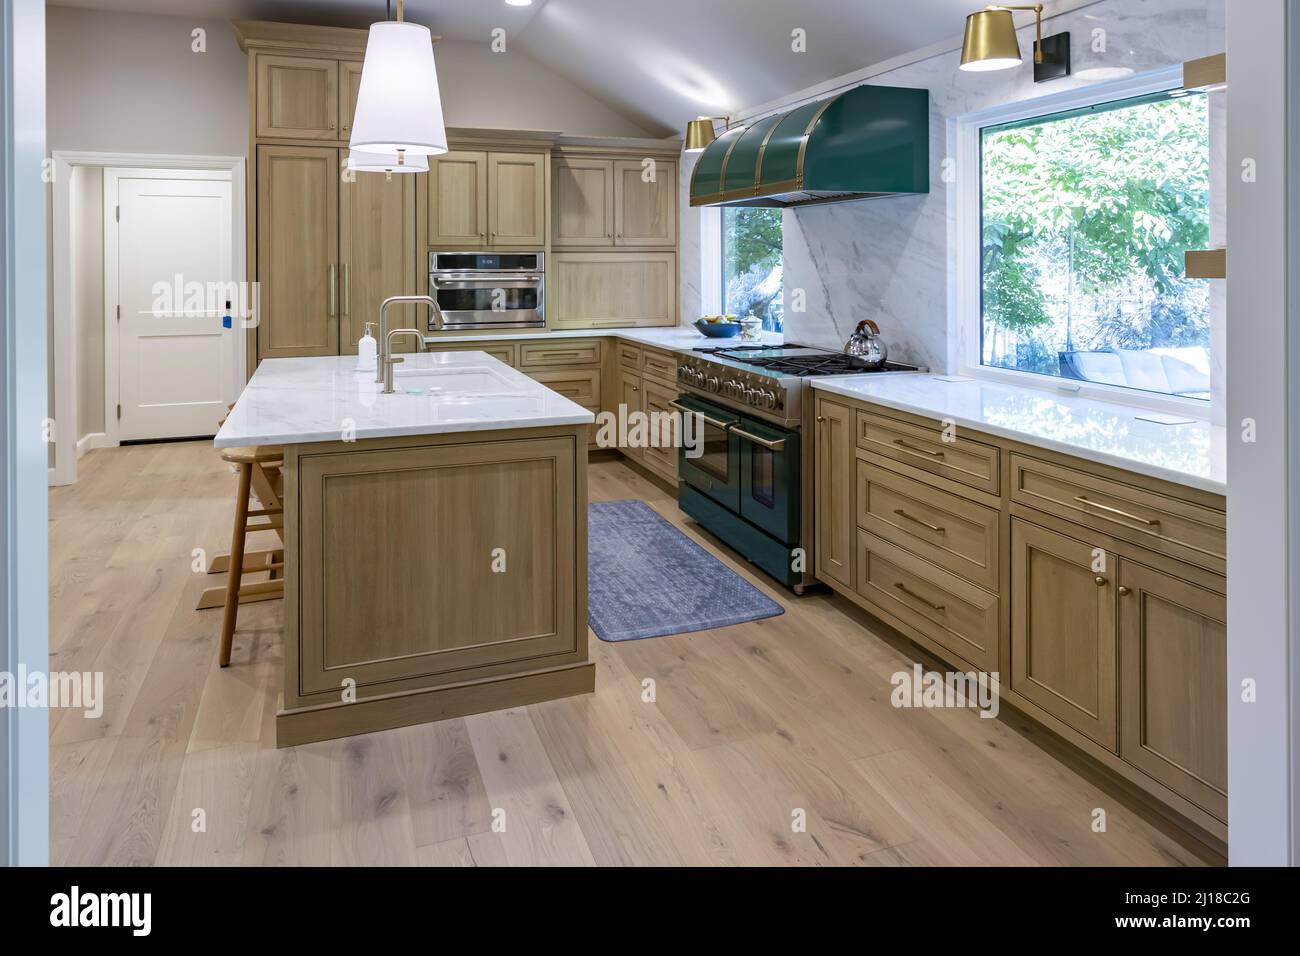 The kitchen of a classic house with wooden and marble counters and island Stock Photo